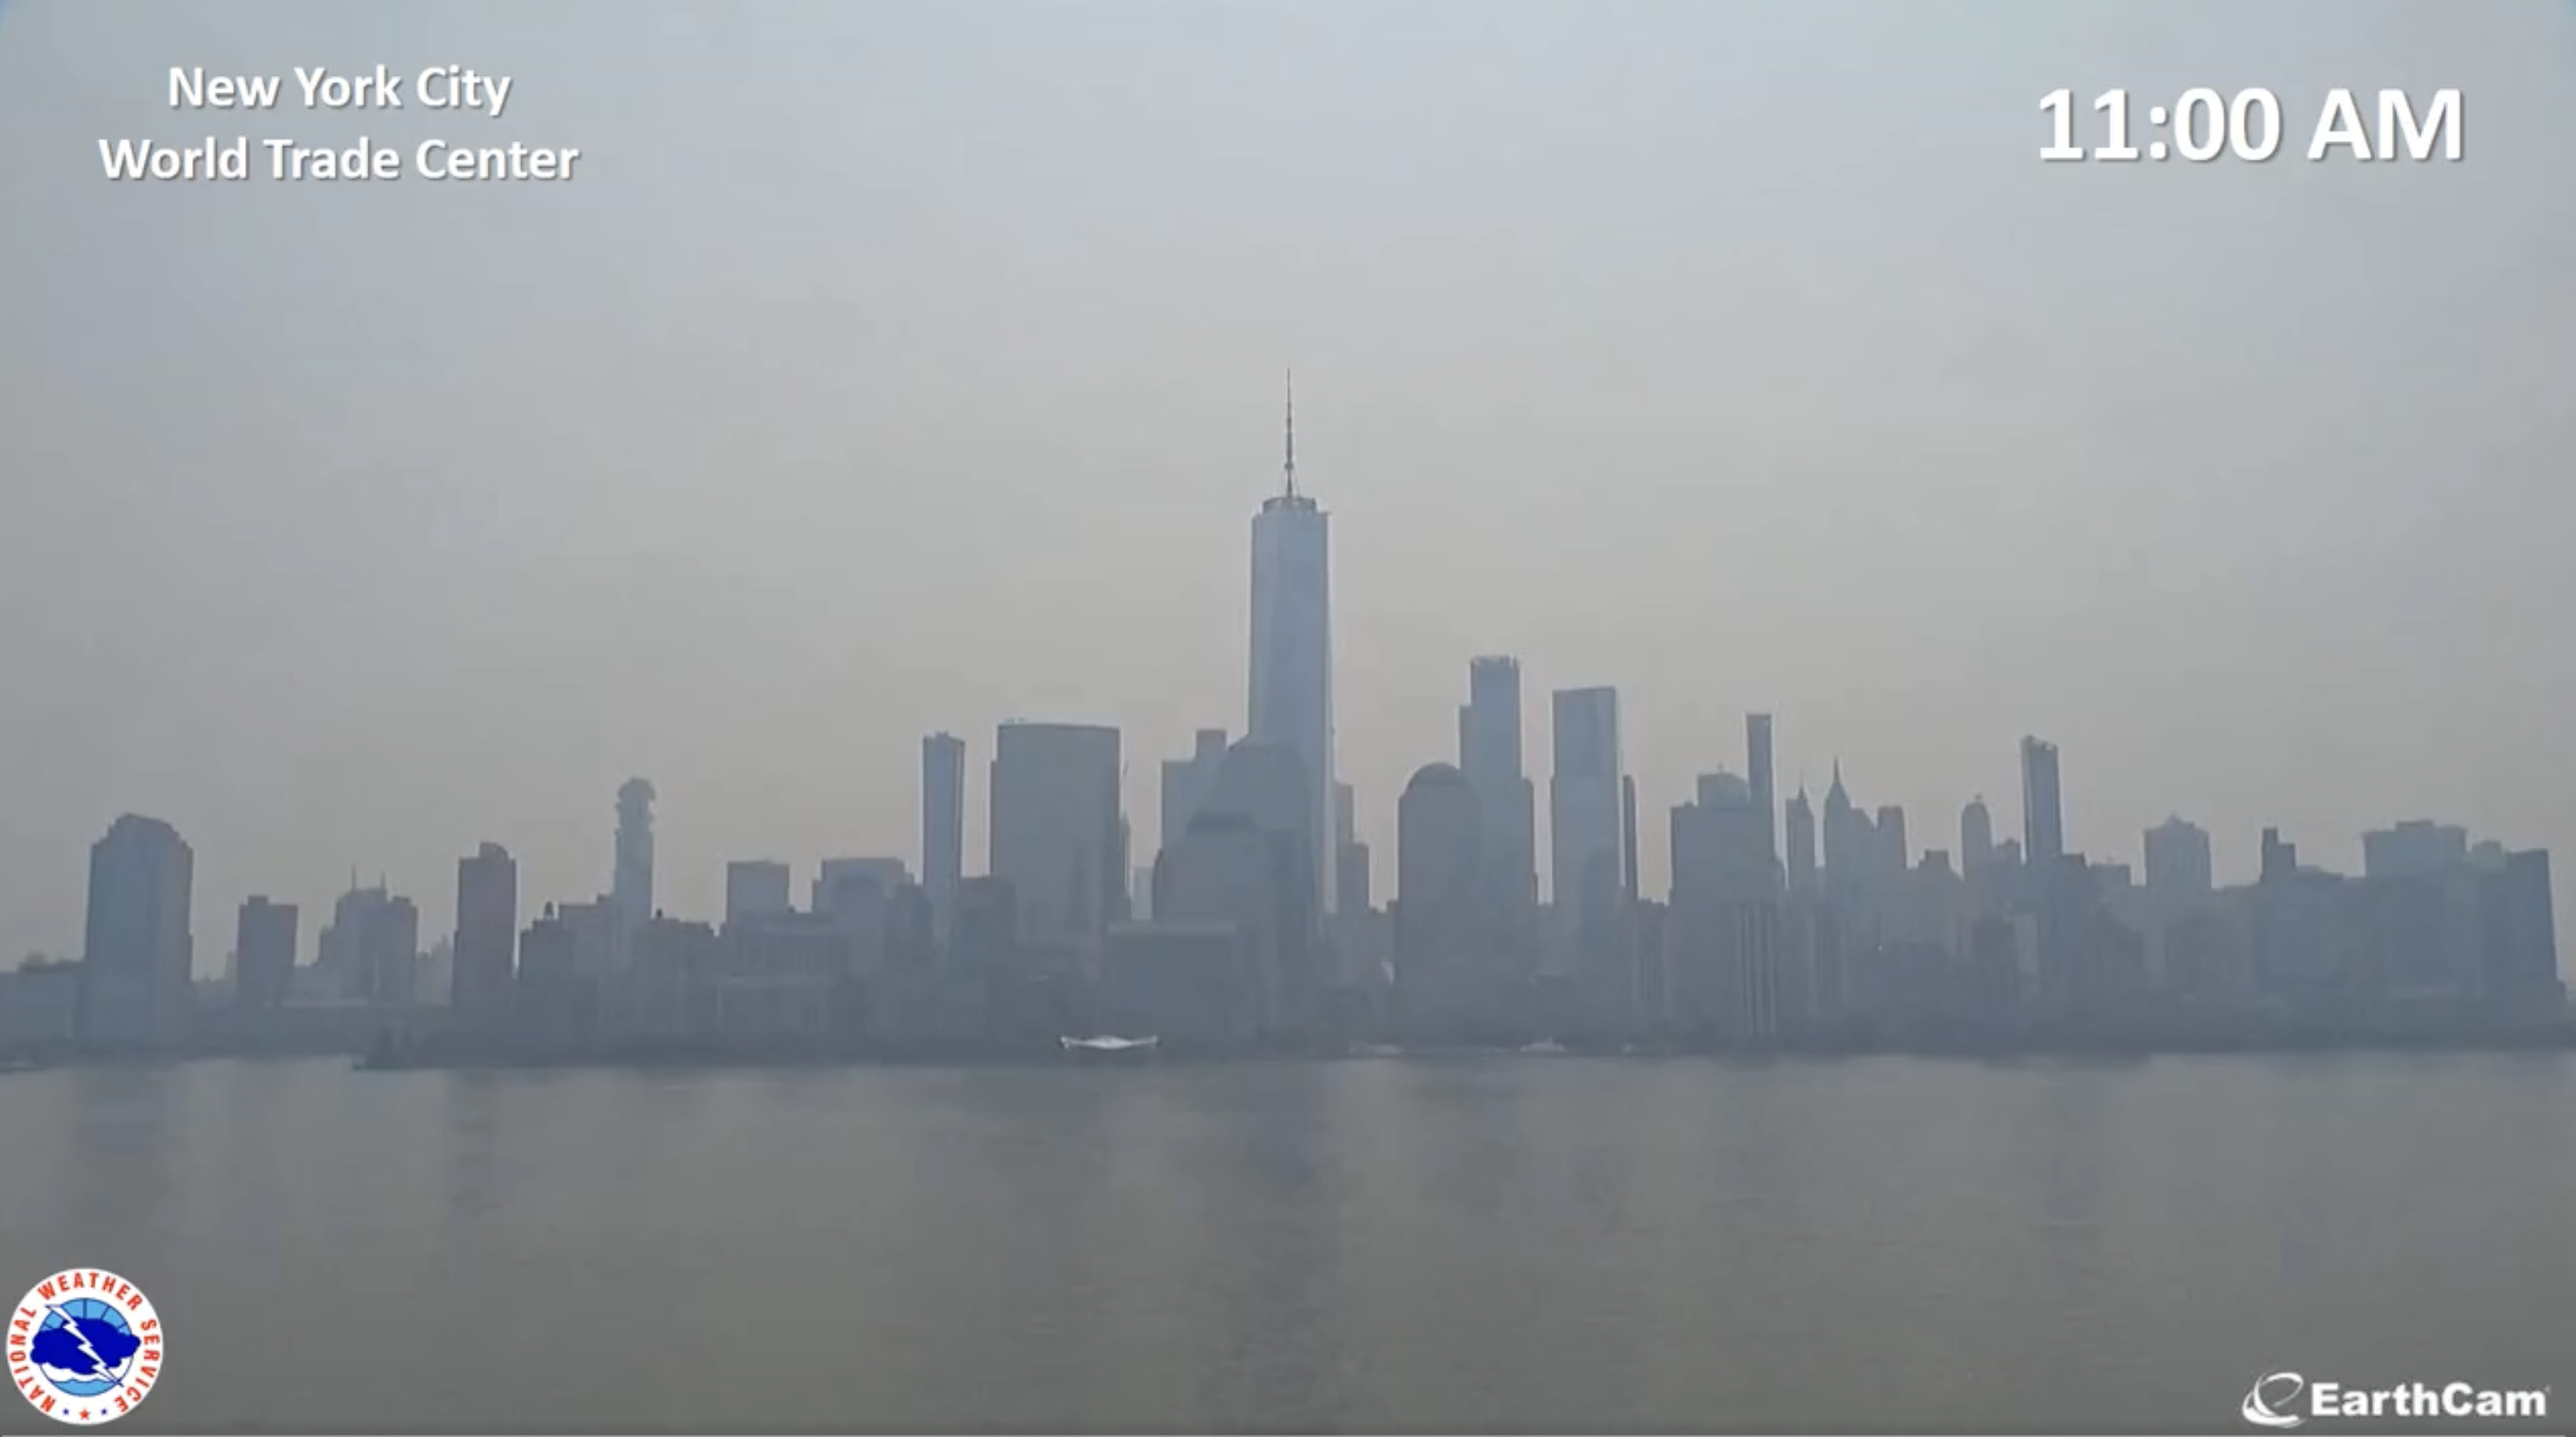 View of the downtown Manhattan skyline at 11 am, with the sky foggy